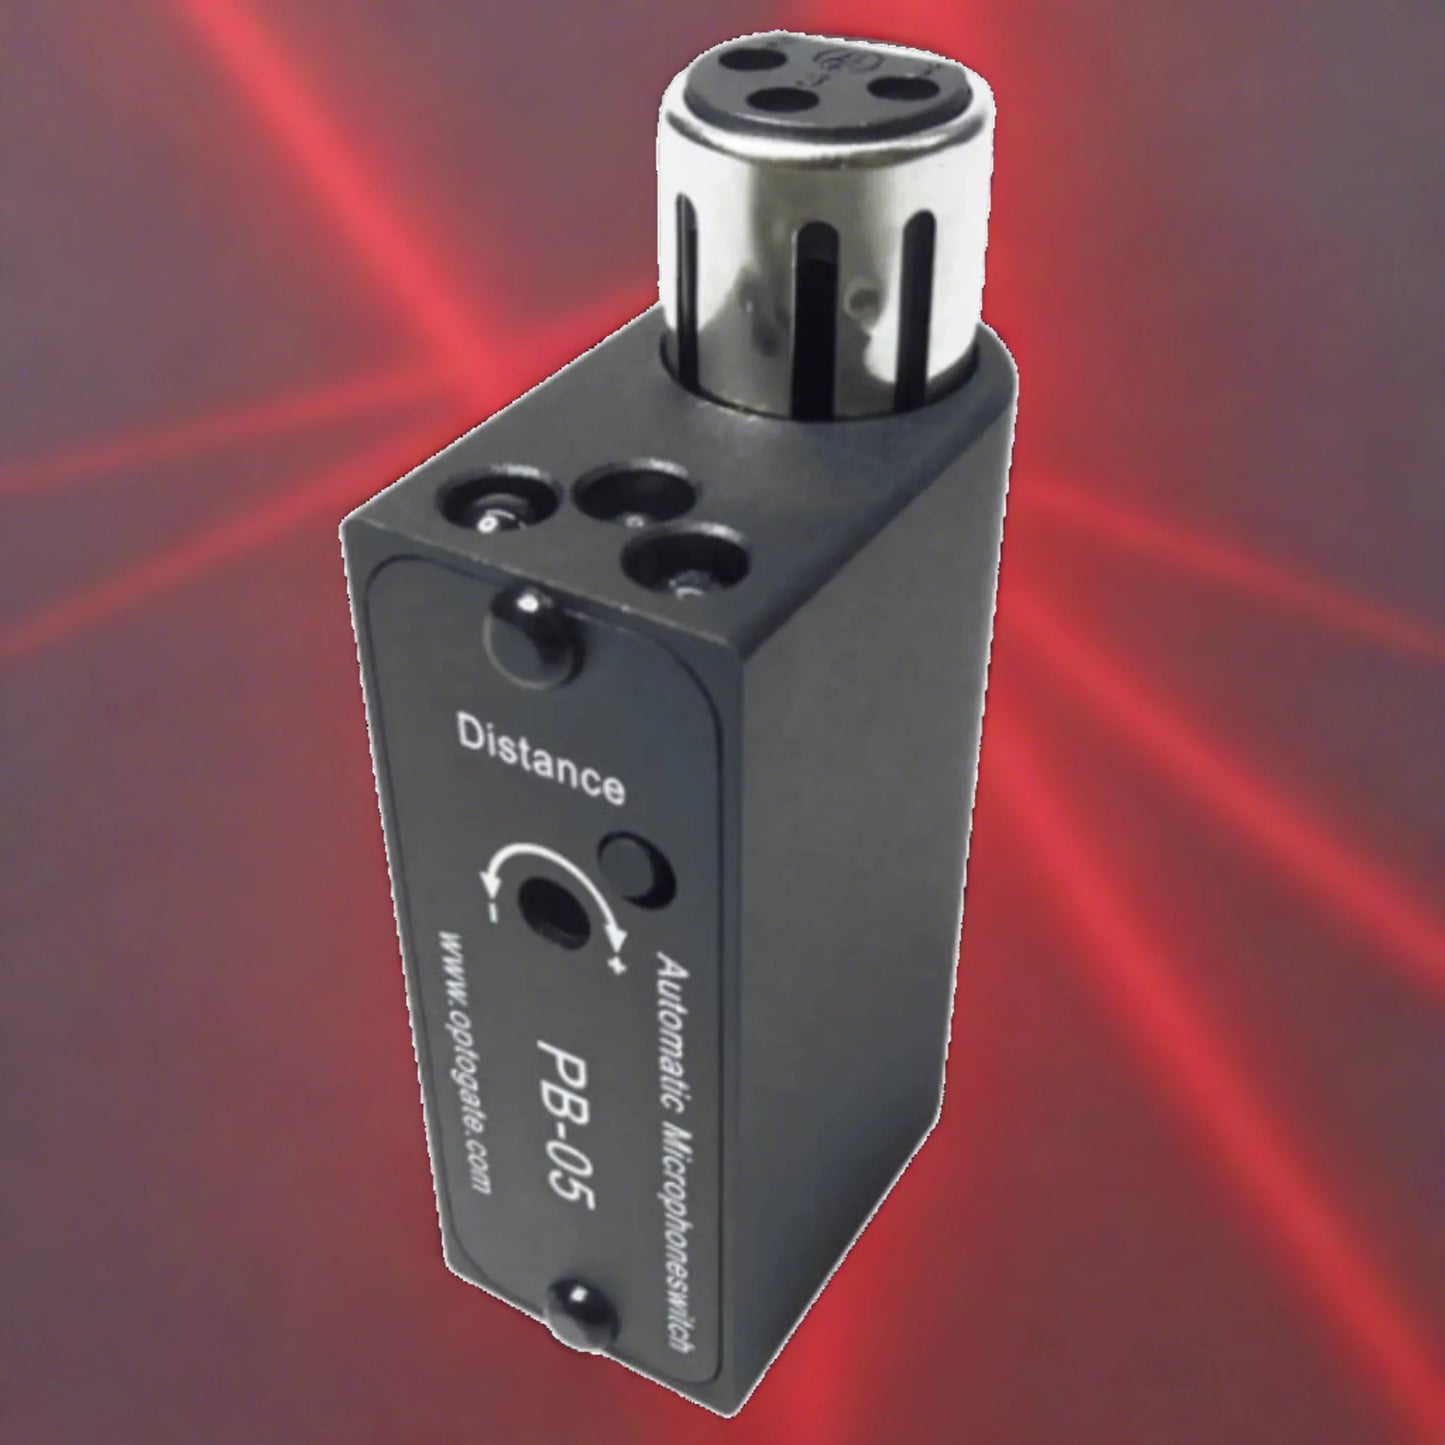 Optogate PB 05 M Feedback Eliminator uses infrared lasers to sense musicians